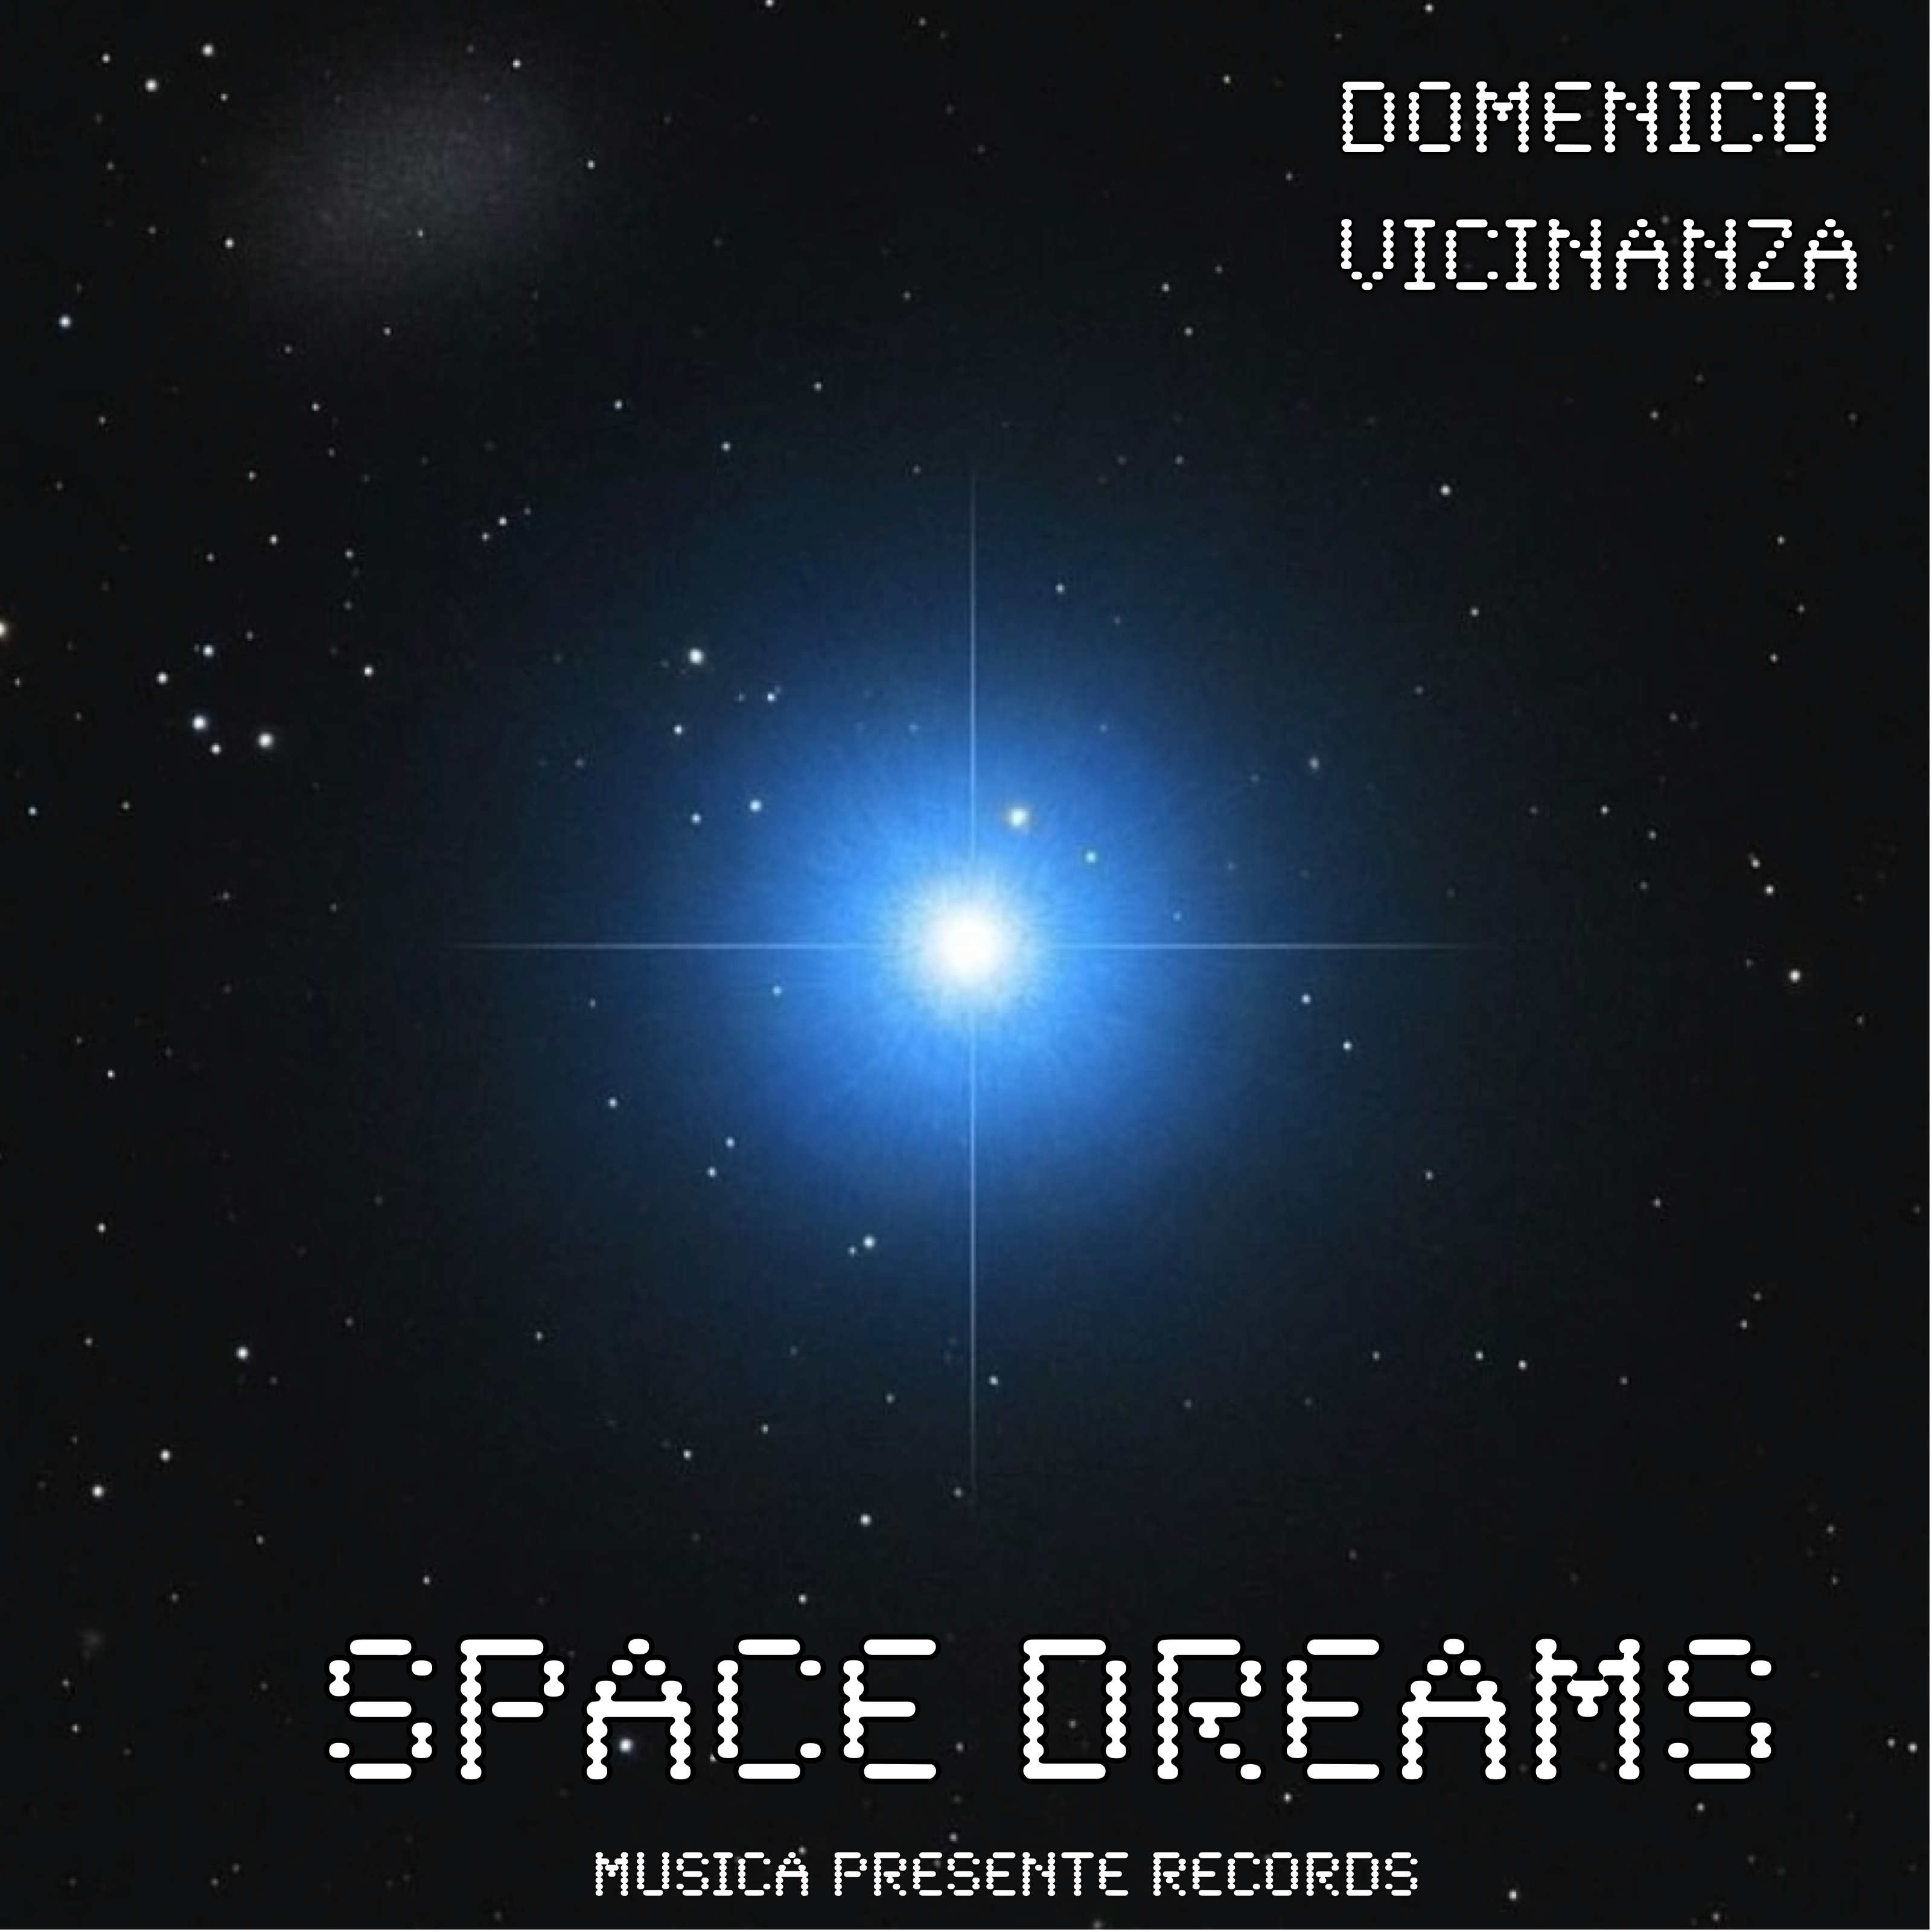 A sonic journey through space and time by the scientist and music composer Domenico Vicinanza